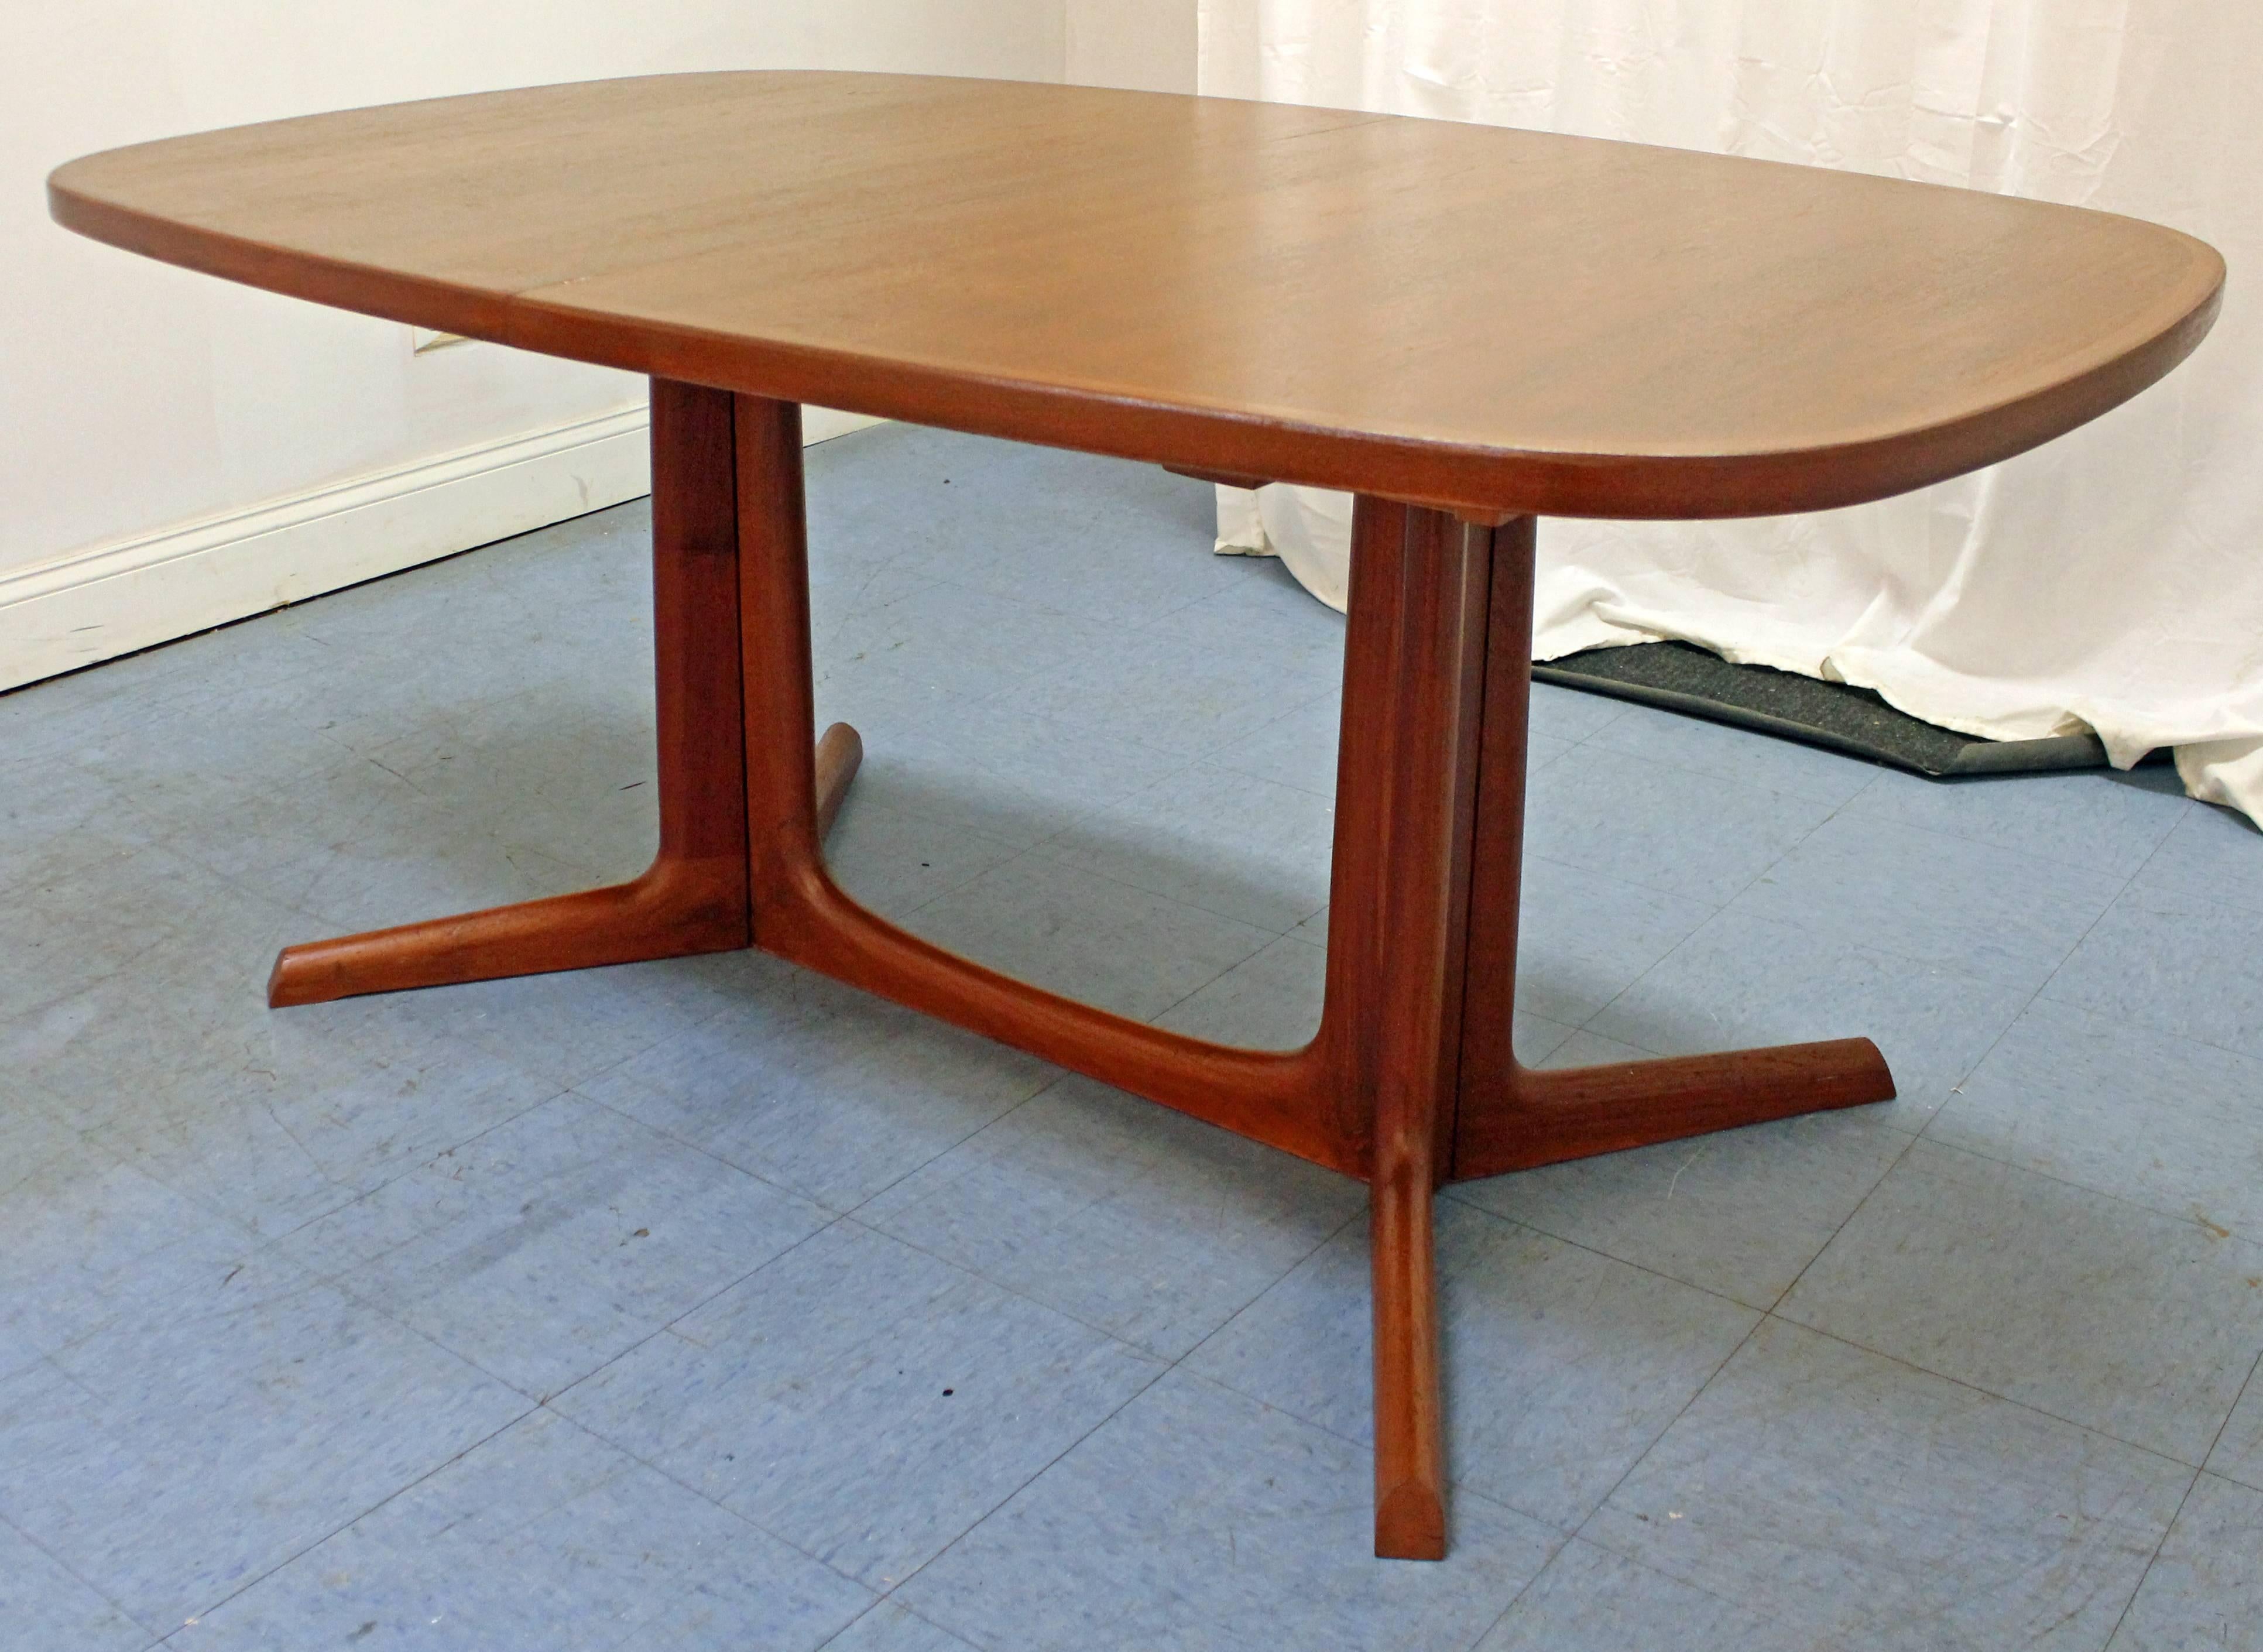 This table has been refinished. Includes two extension boards and is made of teak. Signed by Gudme.